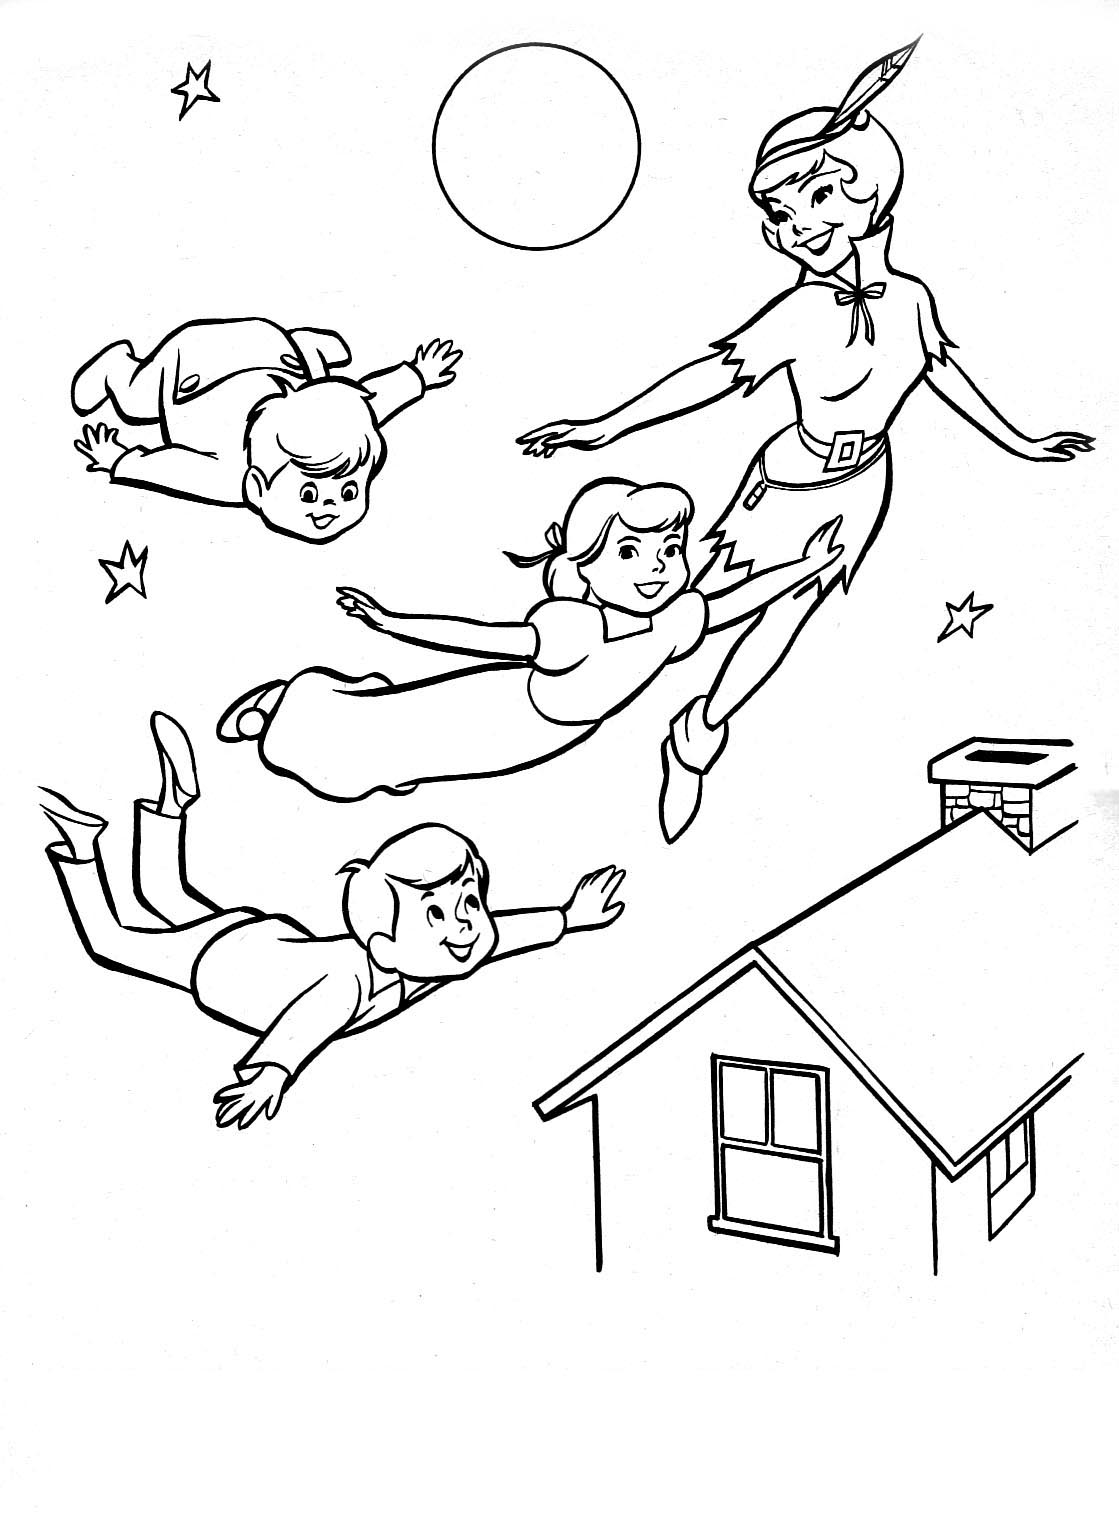 Free Peter Pan Drawing To Print And Color Peter Pan Kids Coloring Pages